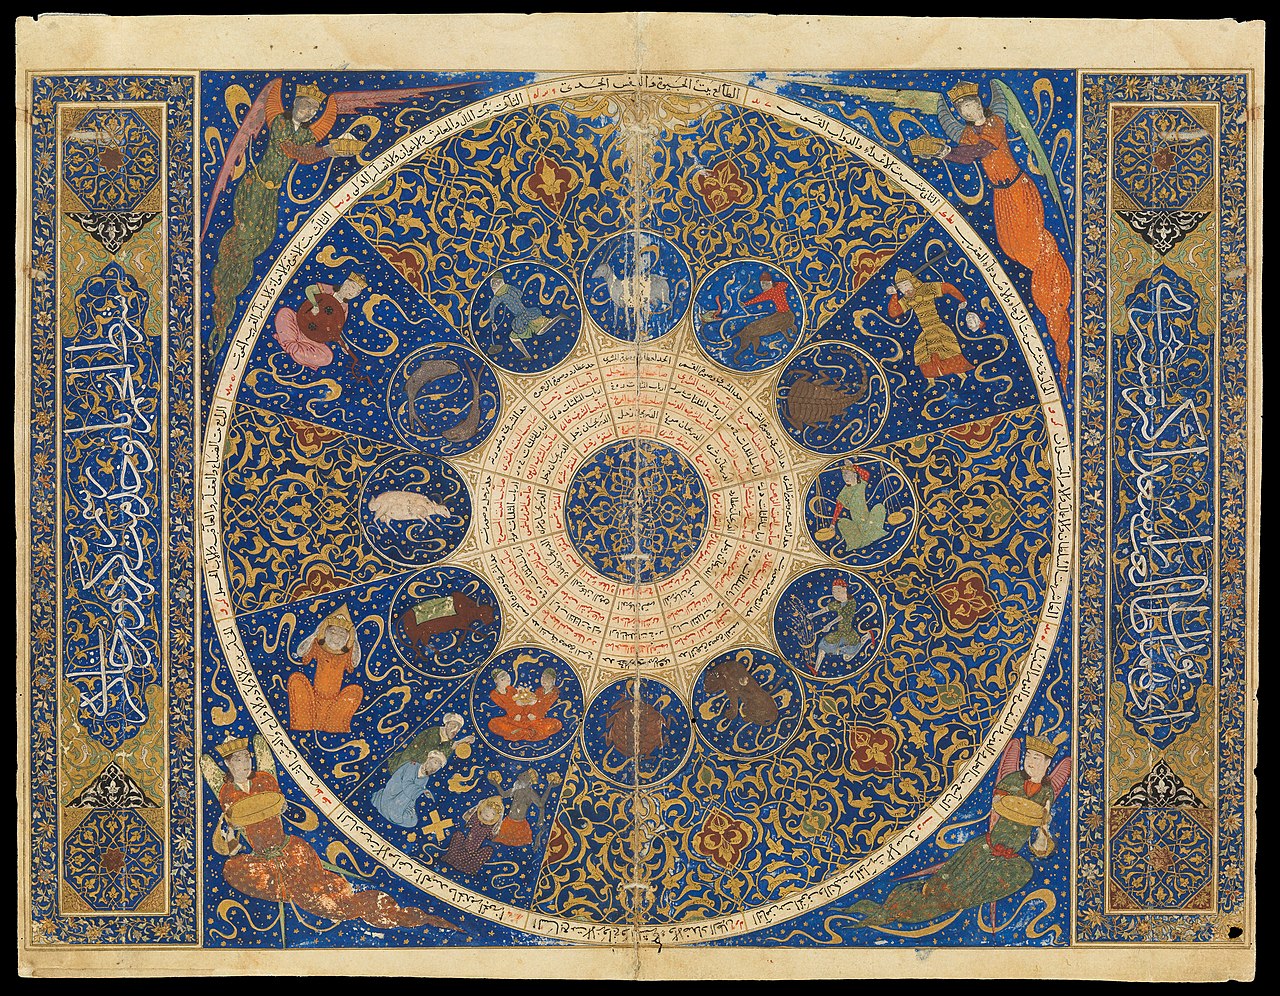  Horoscope from the book of the birth of Iskandar.